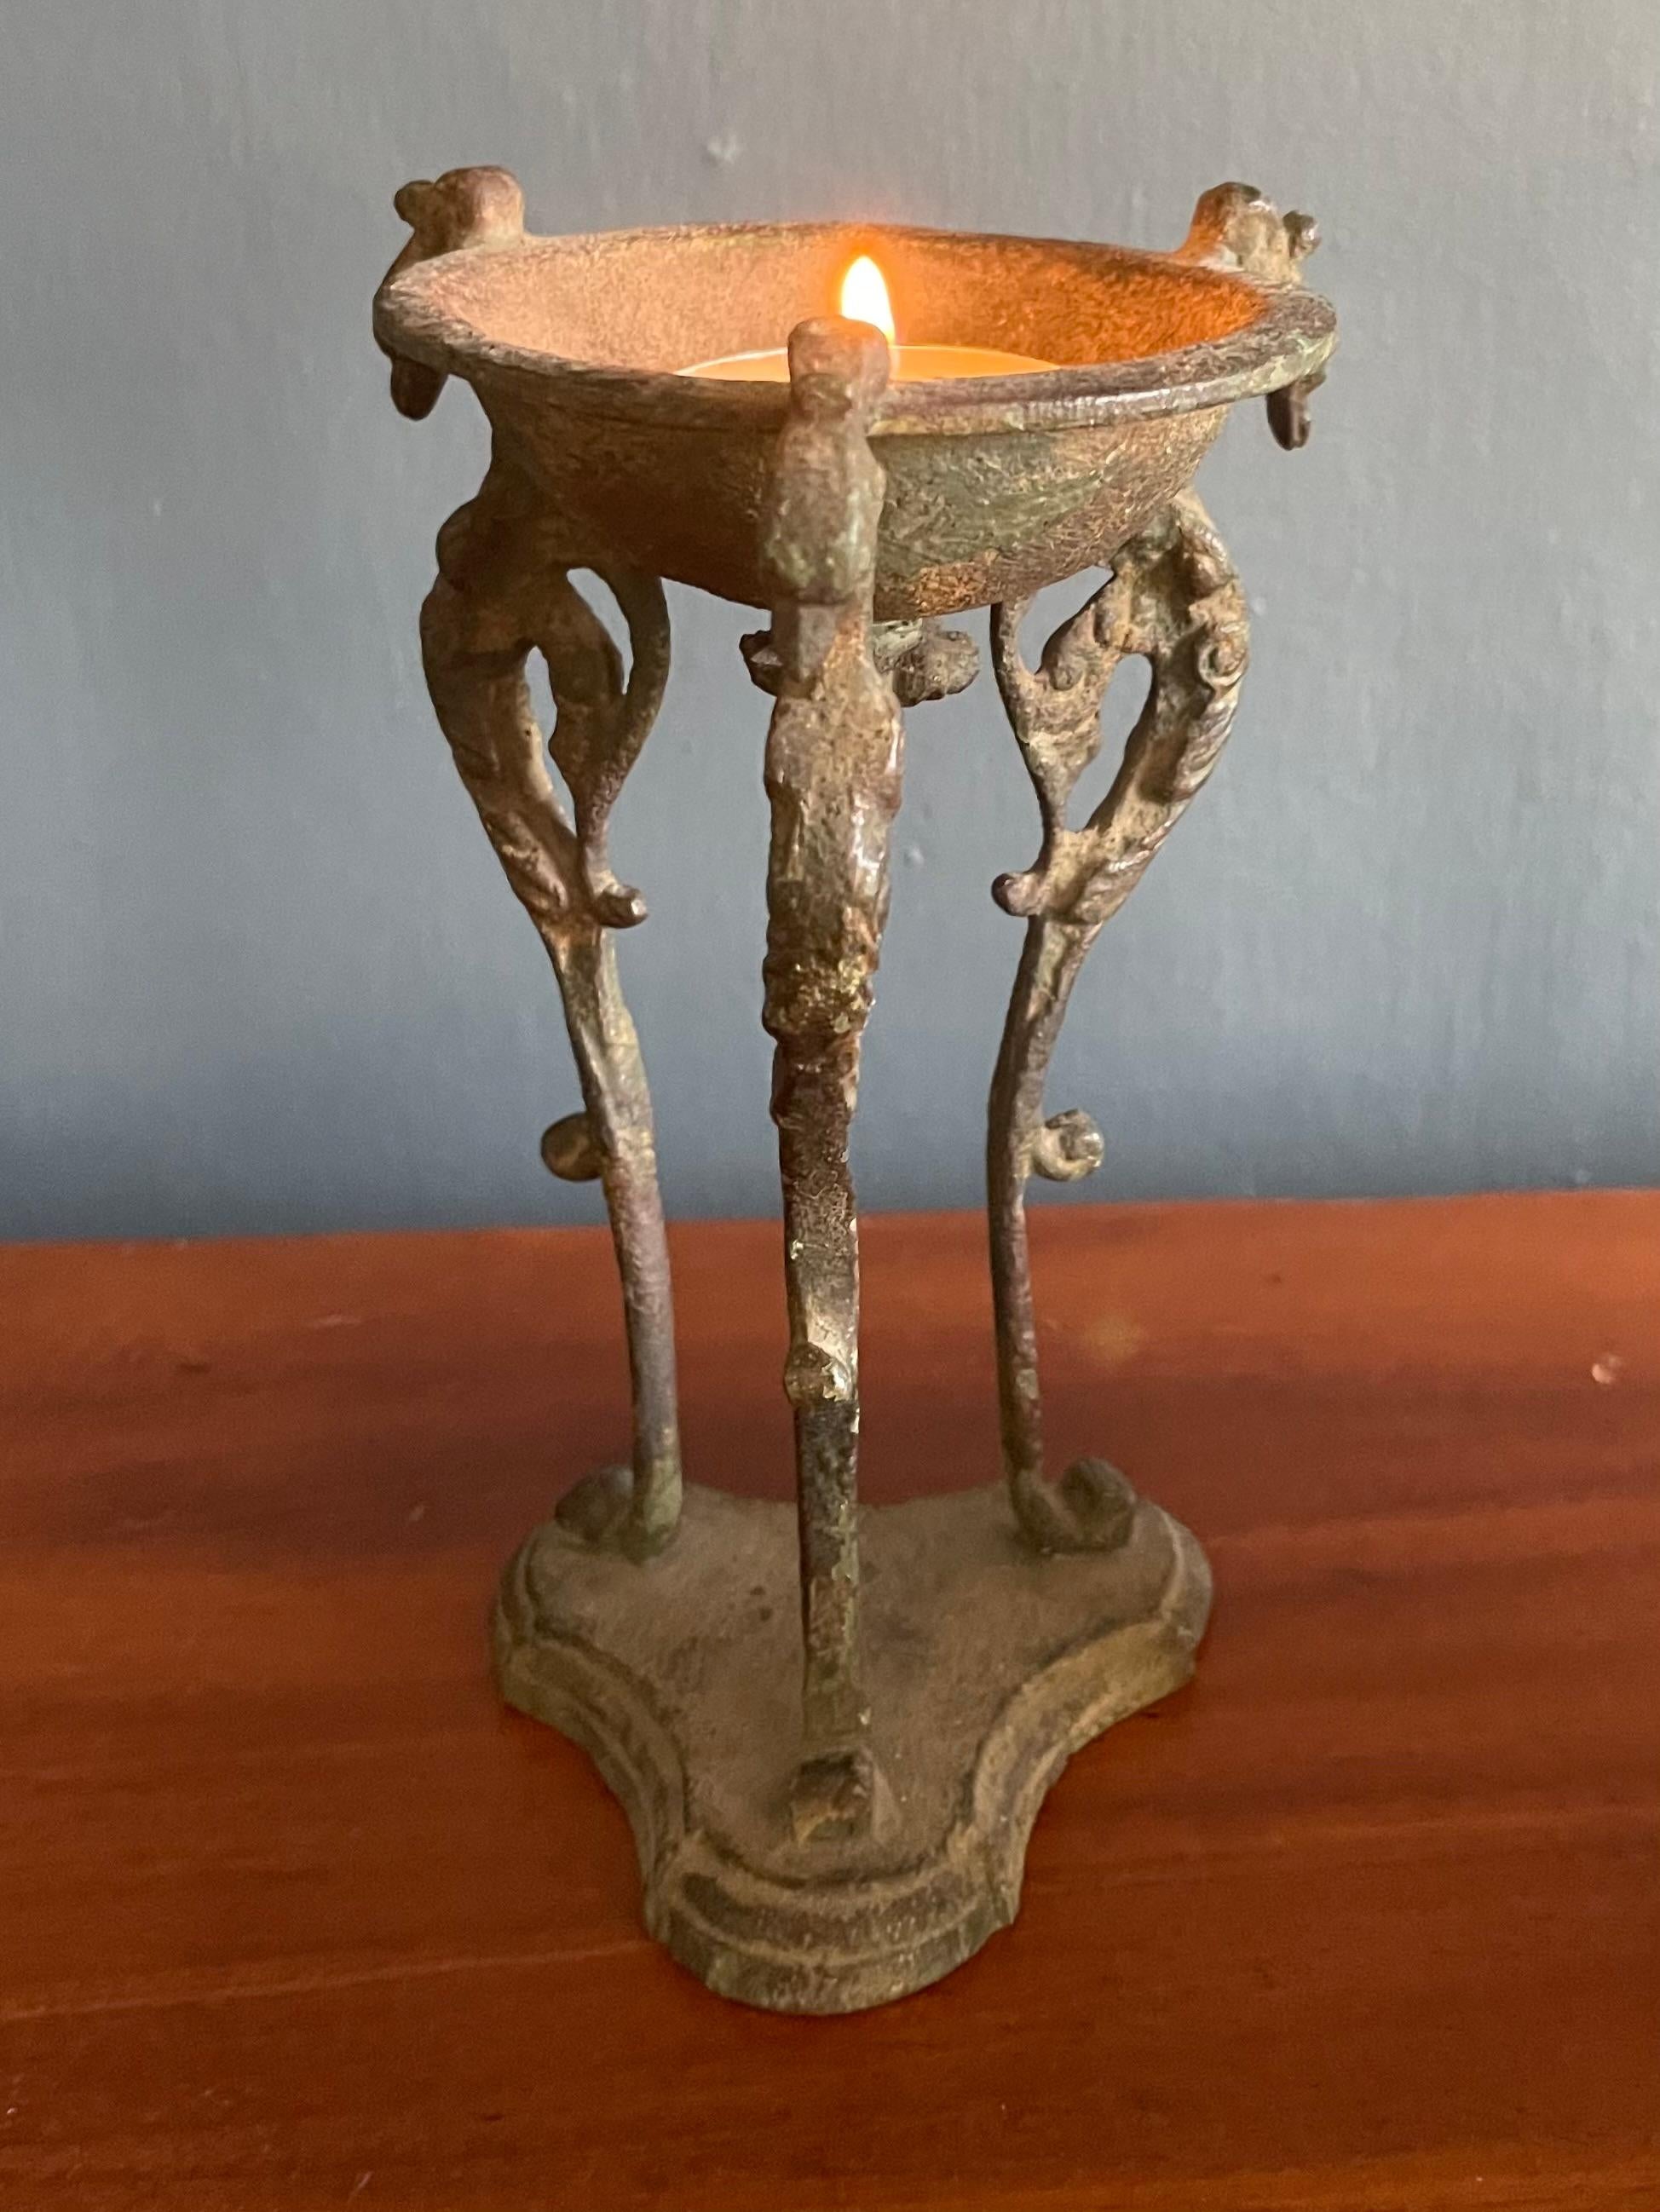 Bronze bird tripod candle stand. Antique Italian softly patinated green bronze tripod oil lamp / votive candle stand in the classical style popularized during the Grand Tour period with three figural bird figures with inward scrolling wings